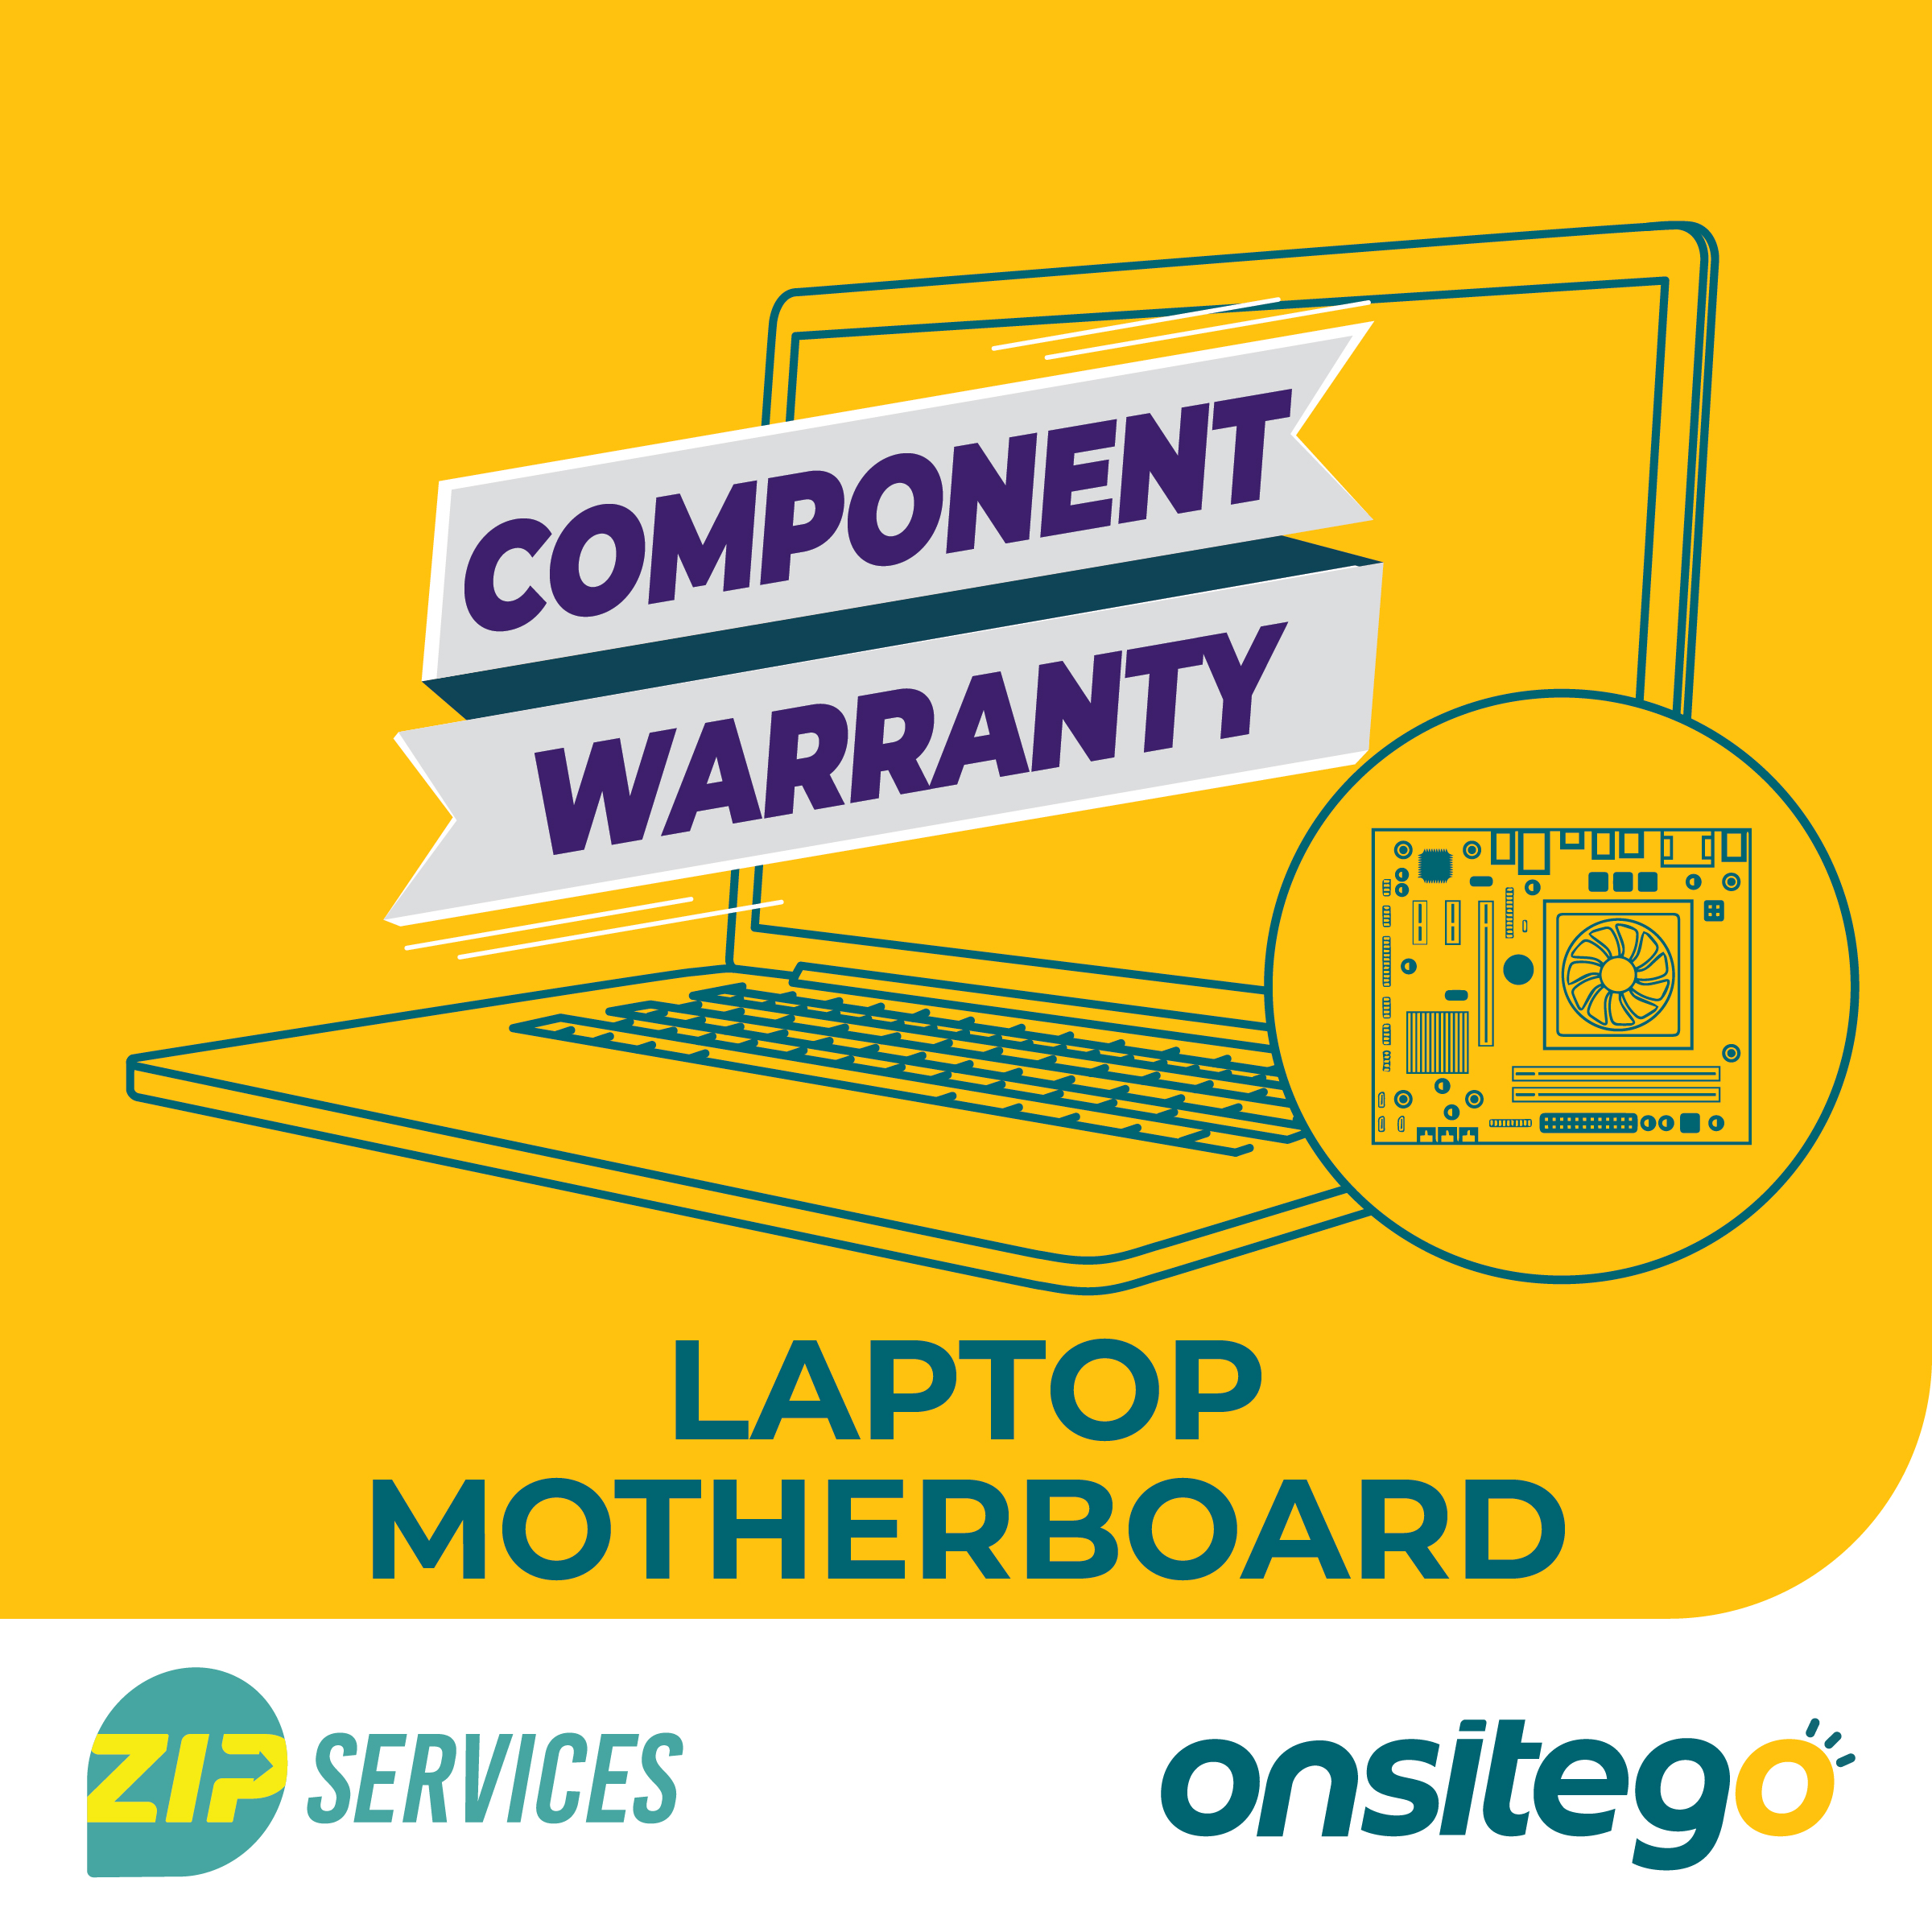 OnsiteGo 1 Year Extended Warranty for Motherboard Rs. 300000 - Rs. 3500000_1